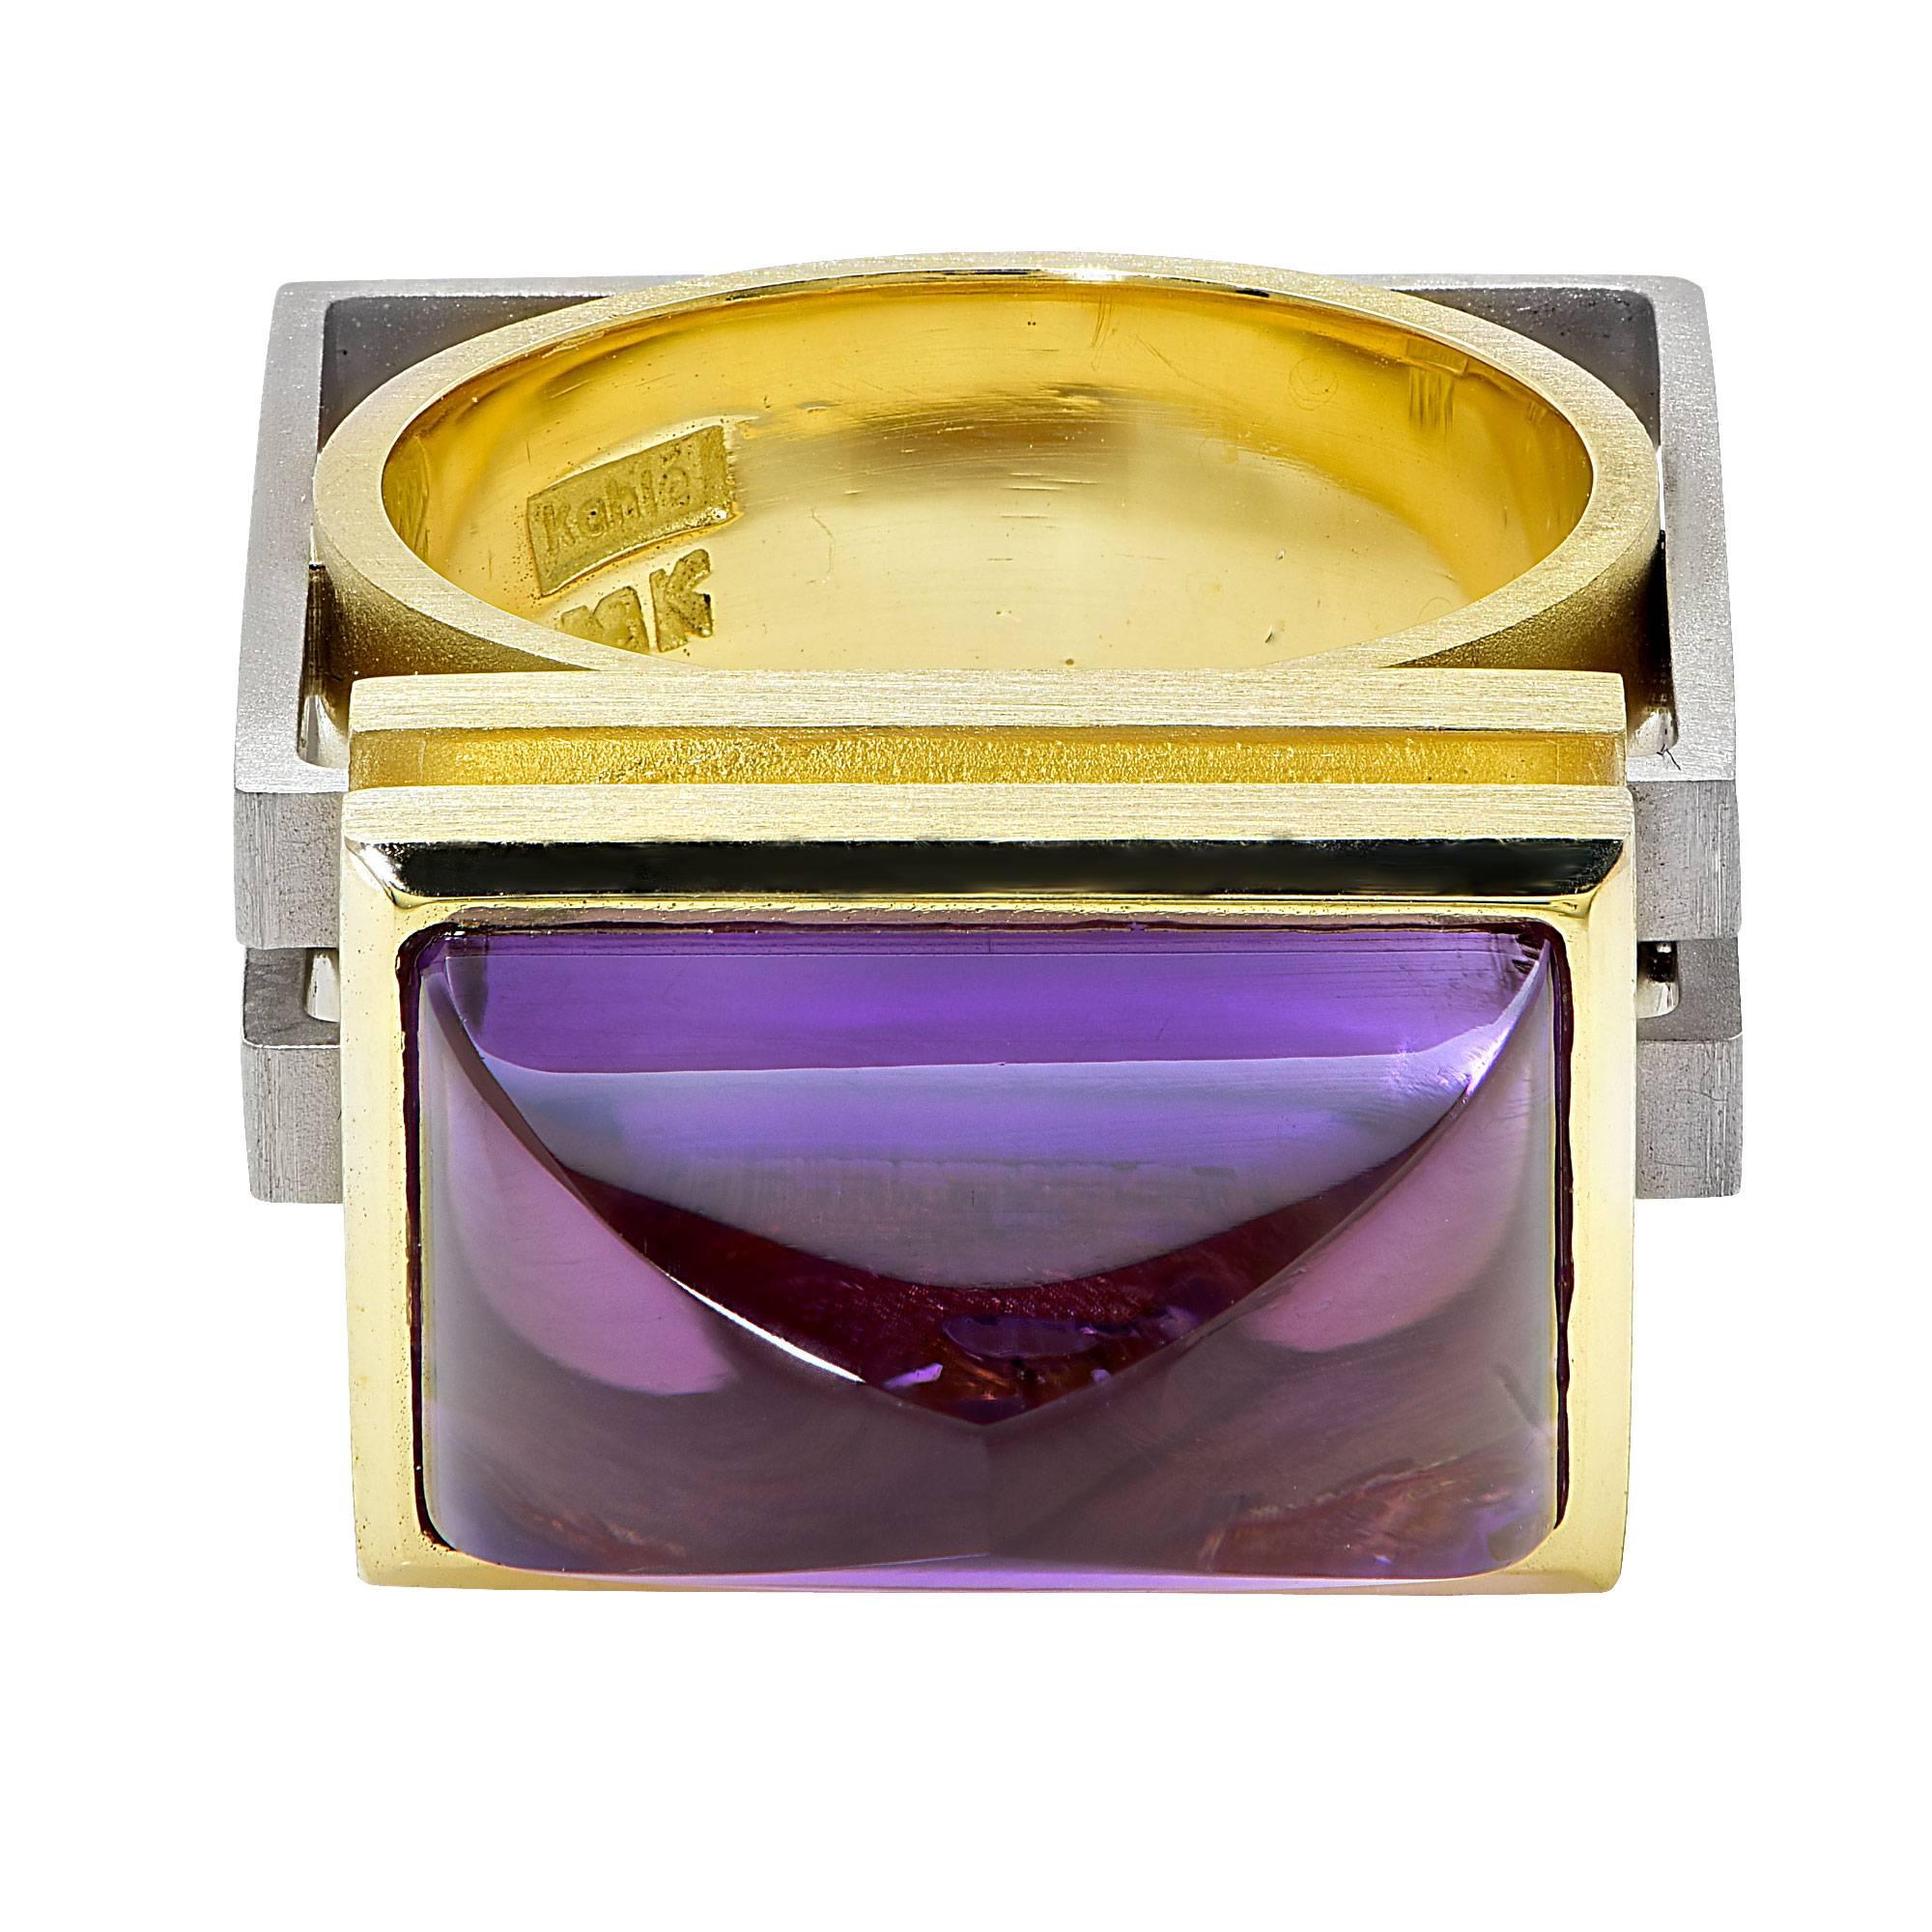 18k white and yellow gold Ruud Kahle ring featuring a cabochon Amethyst weighing approximately 10cts.

Metal weight: 22.56 grams

This amethyst ring is accompanied by a retail appraisal performed by a GIA Graduate Gemologist.